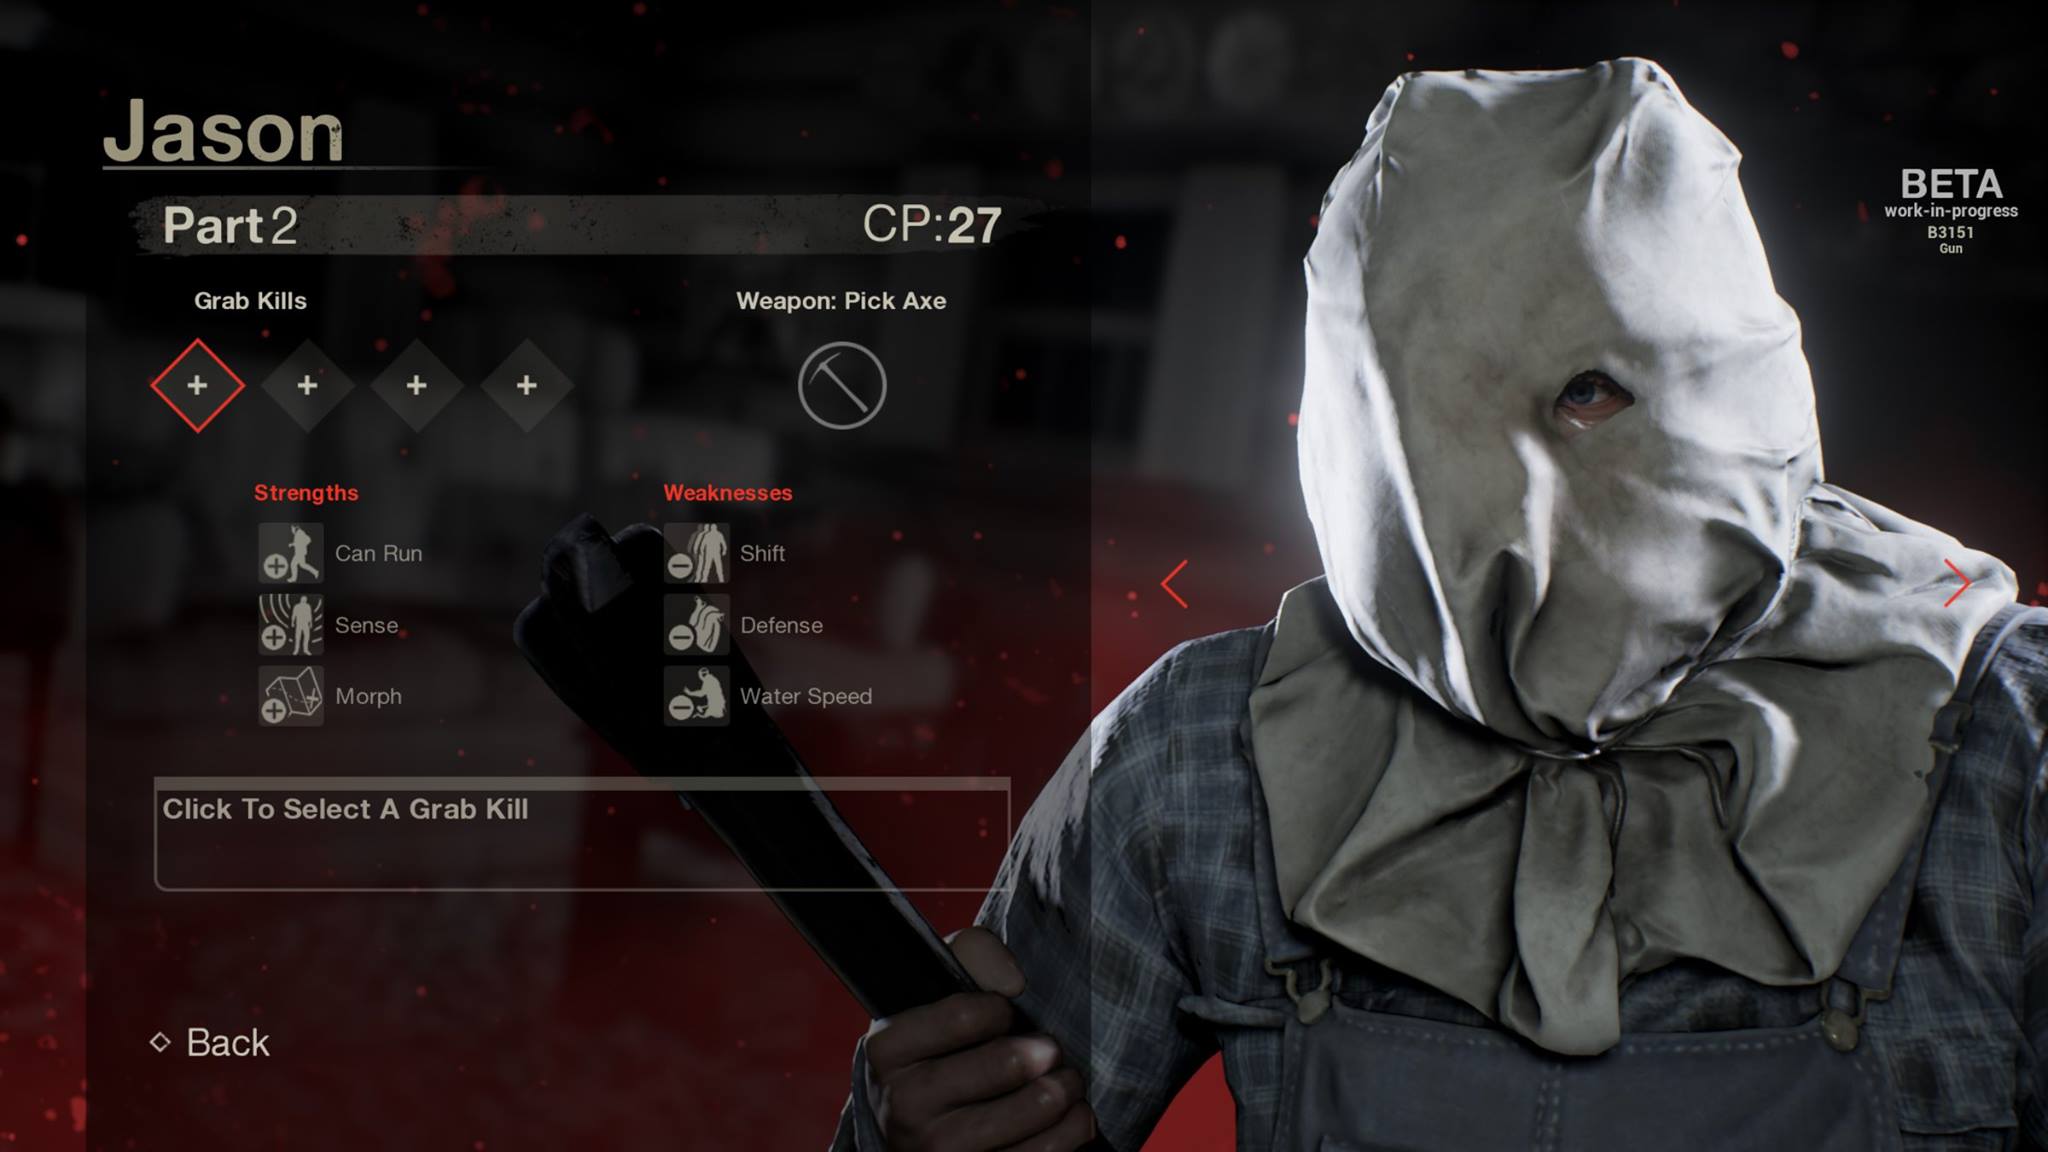 Friday the 13th: The Game': Meet The Ongoing Camp Beta Playables!